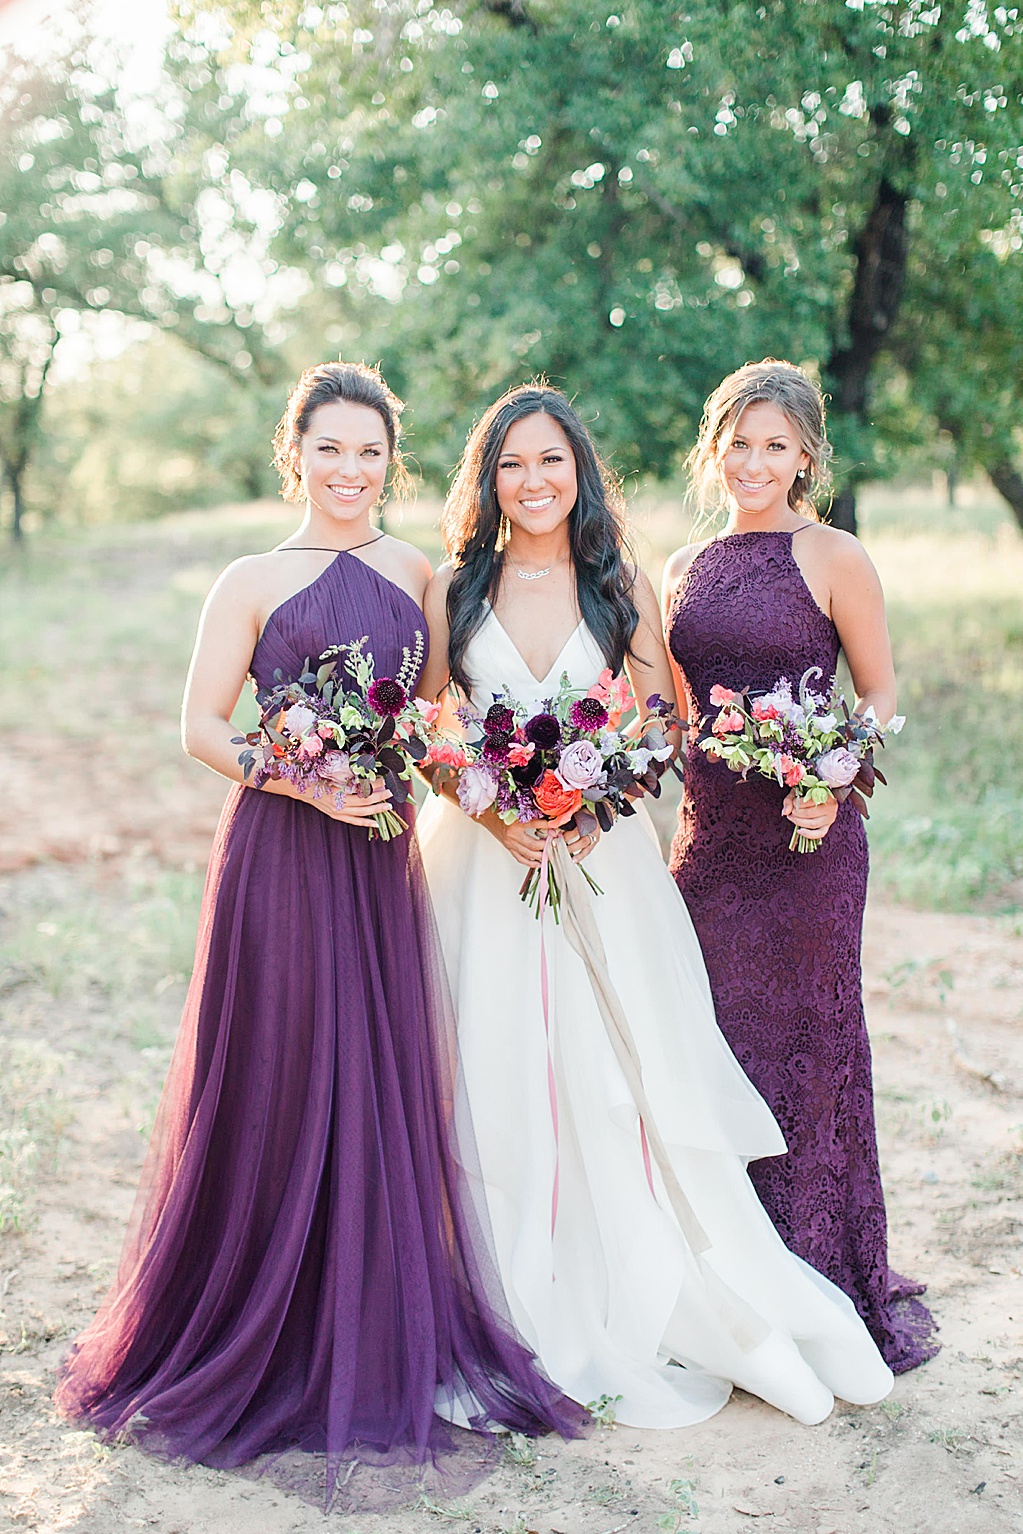 the barn at swallows eve wedding venue in fredericksburg texas photo inspiration featured on Grey Likes Weddings 0022